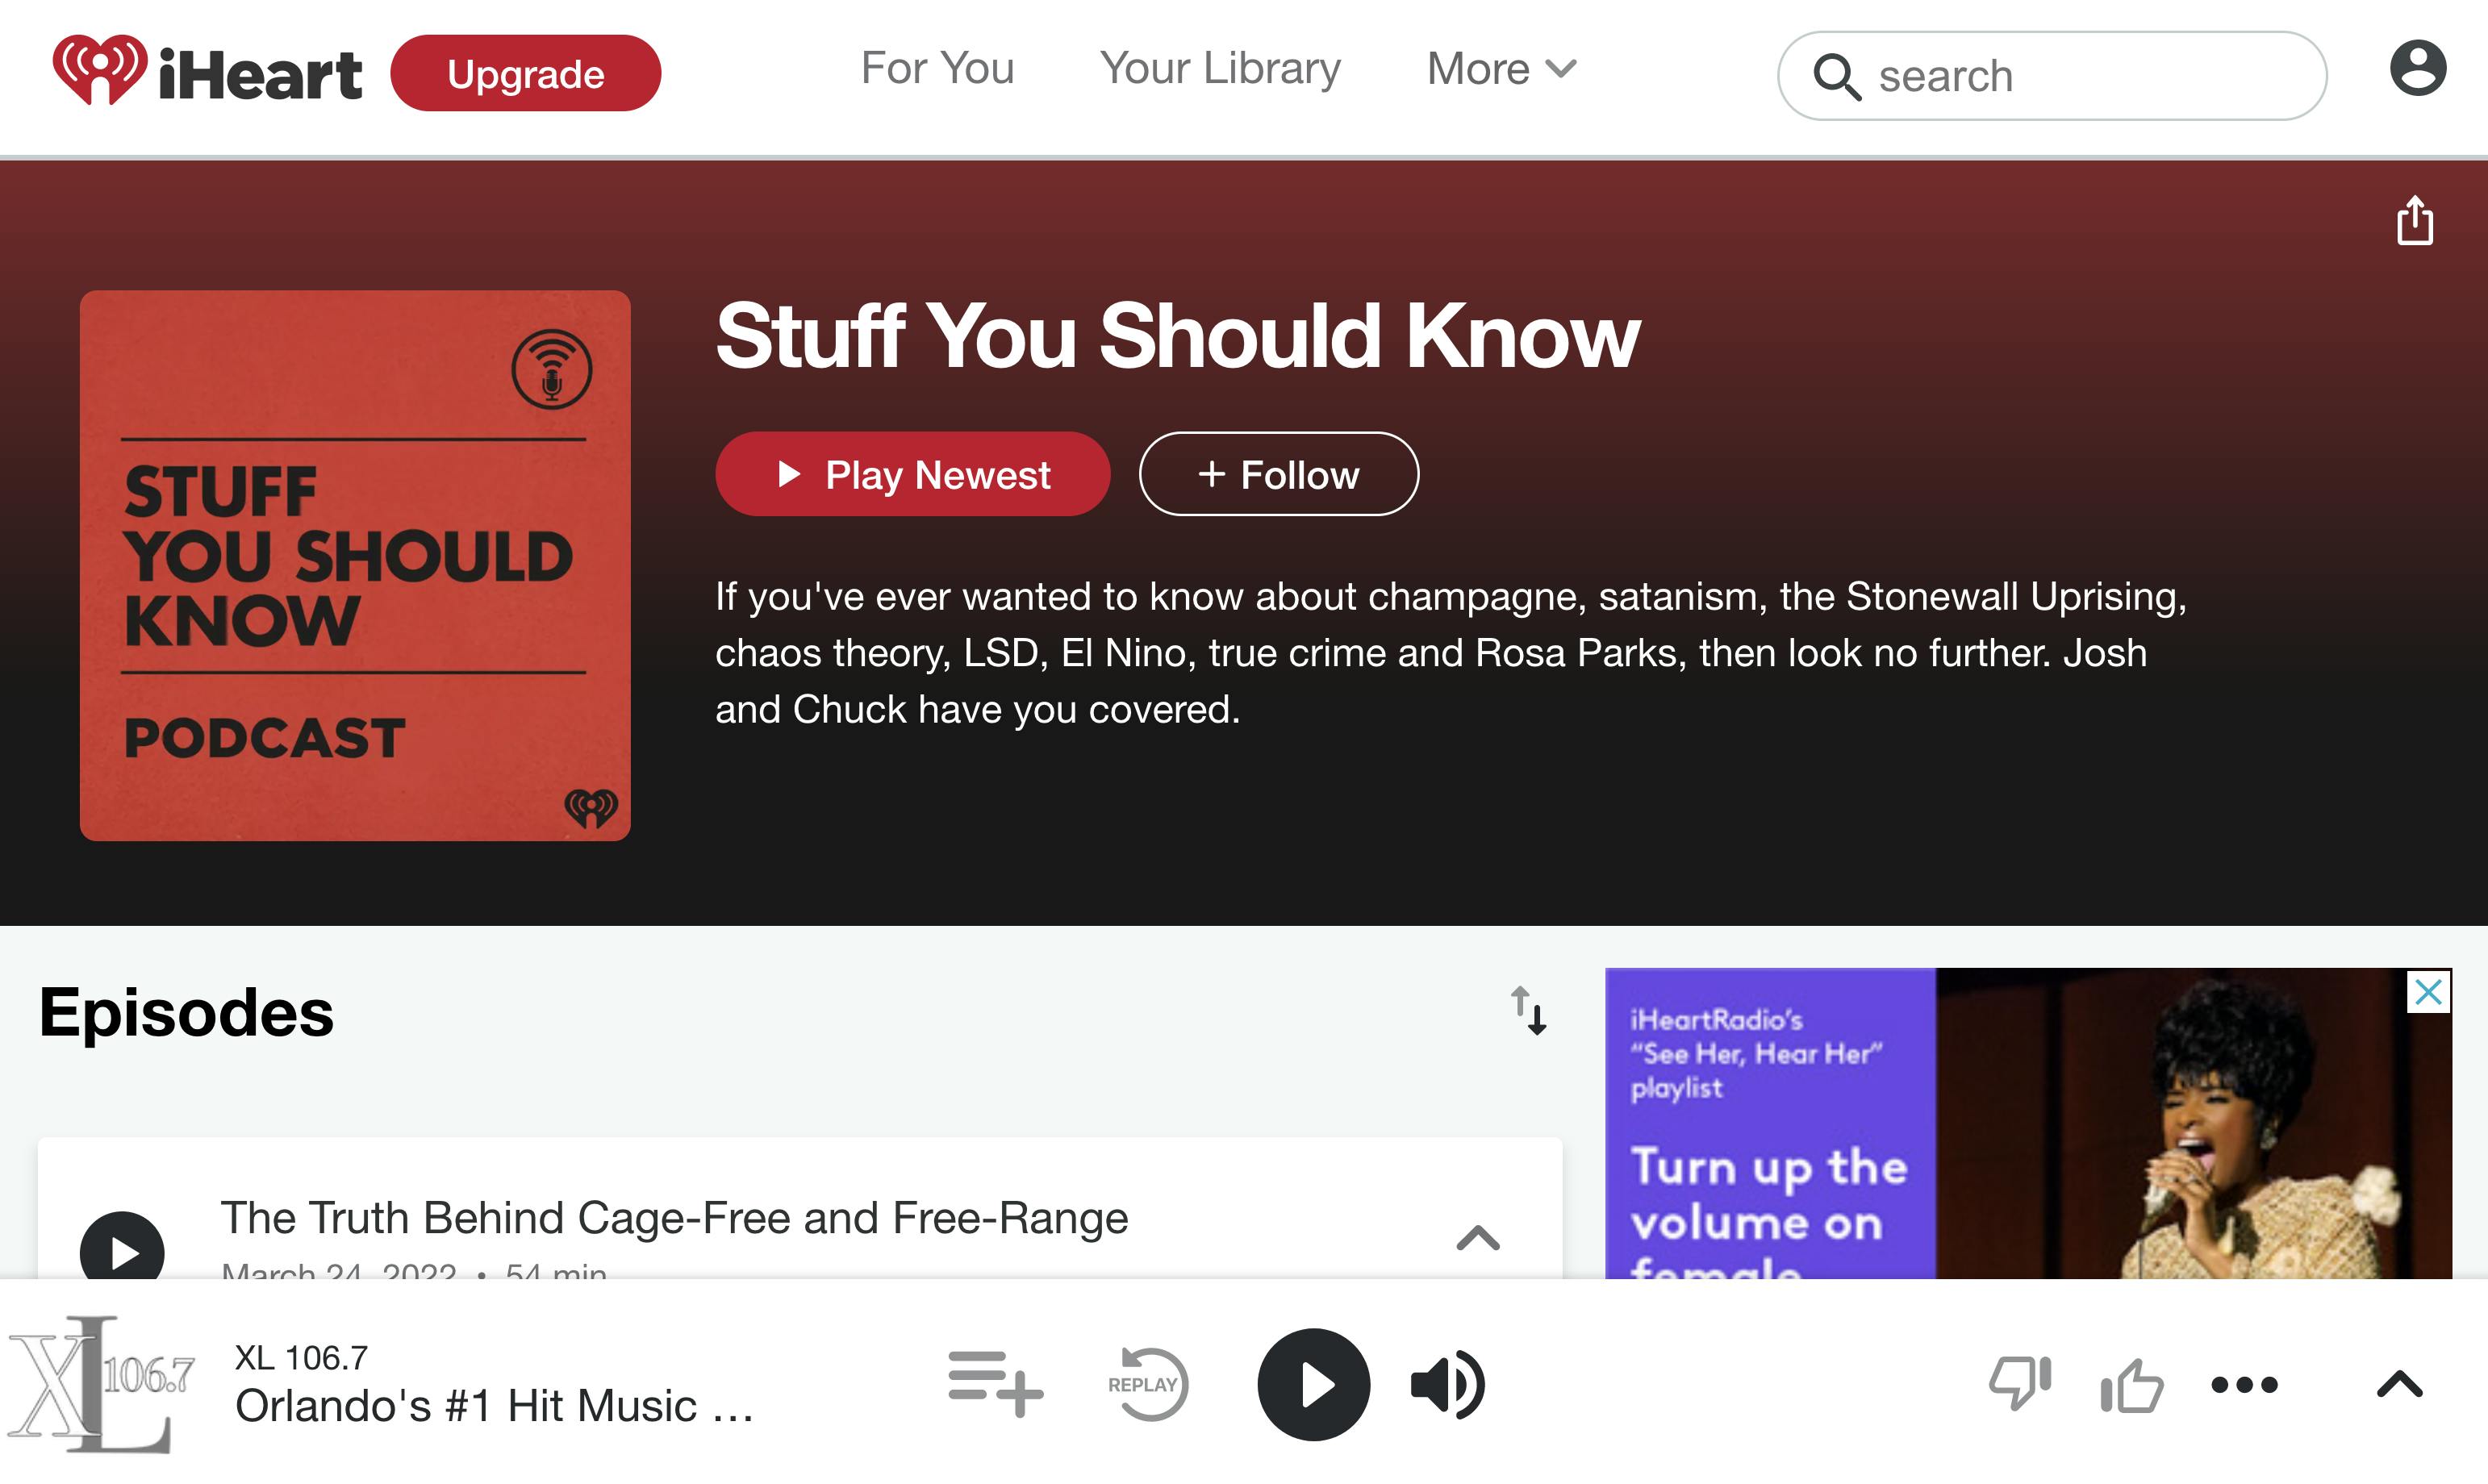 Stuff You Should Know podcast page on iHeartRadio